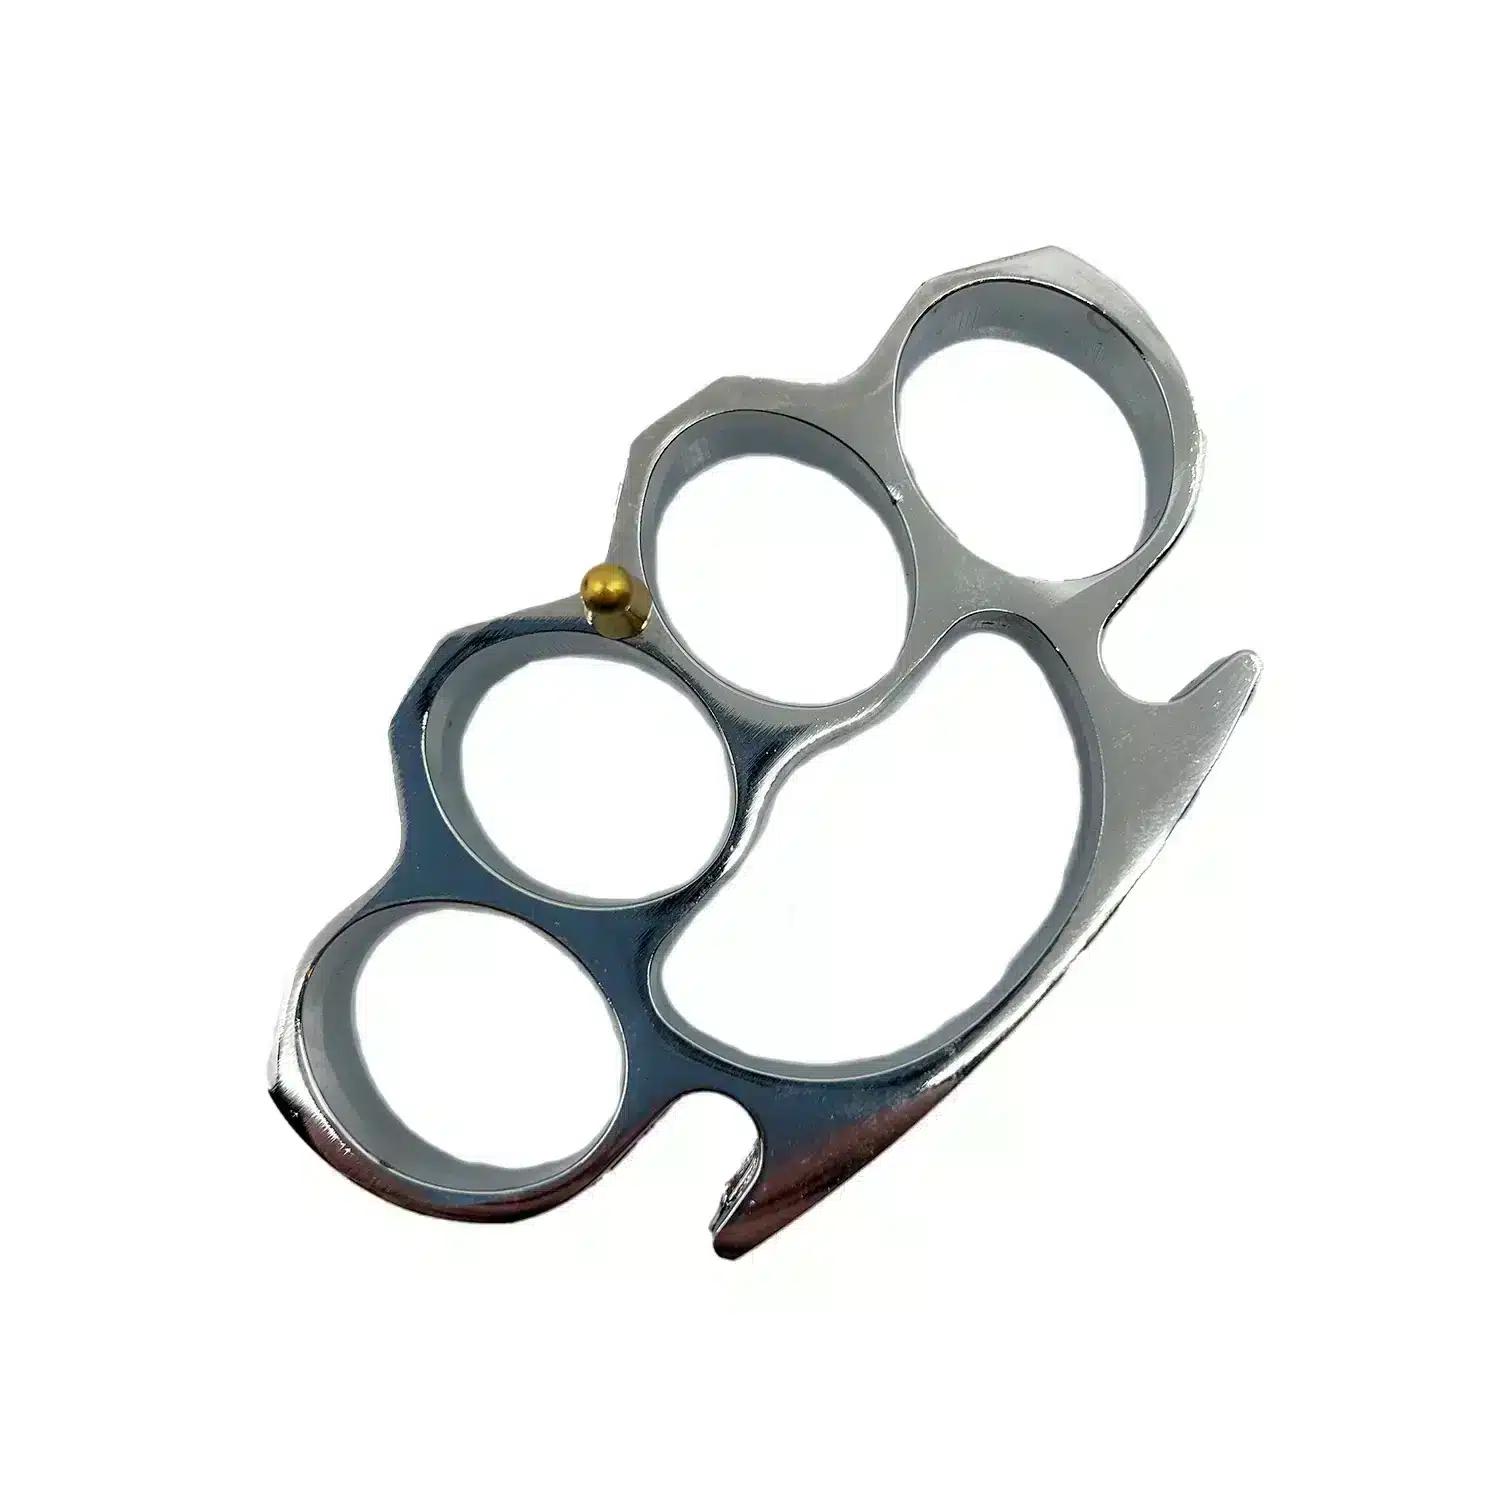 Brass Knuckle Ring | Heavy Metal Knuckle Duster Punch